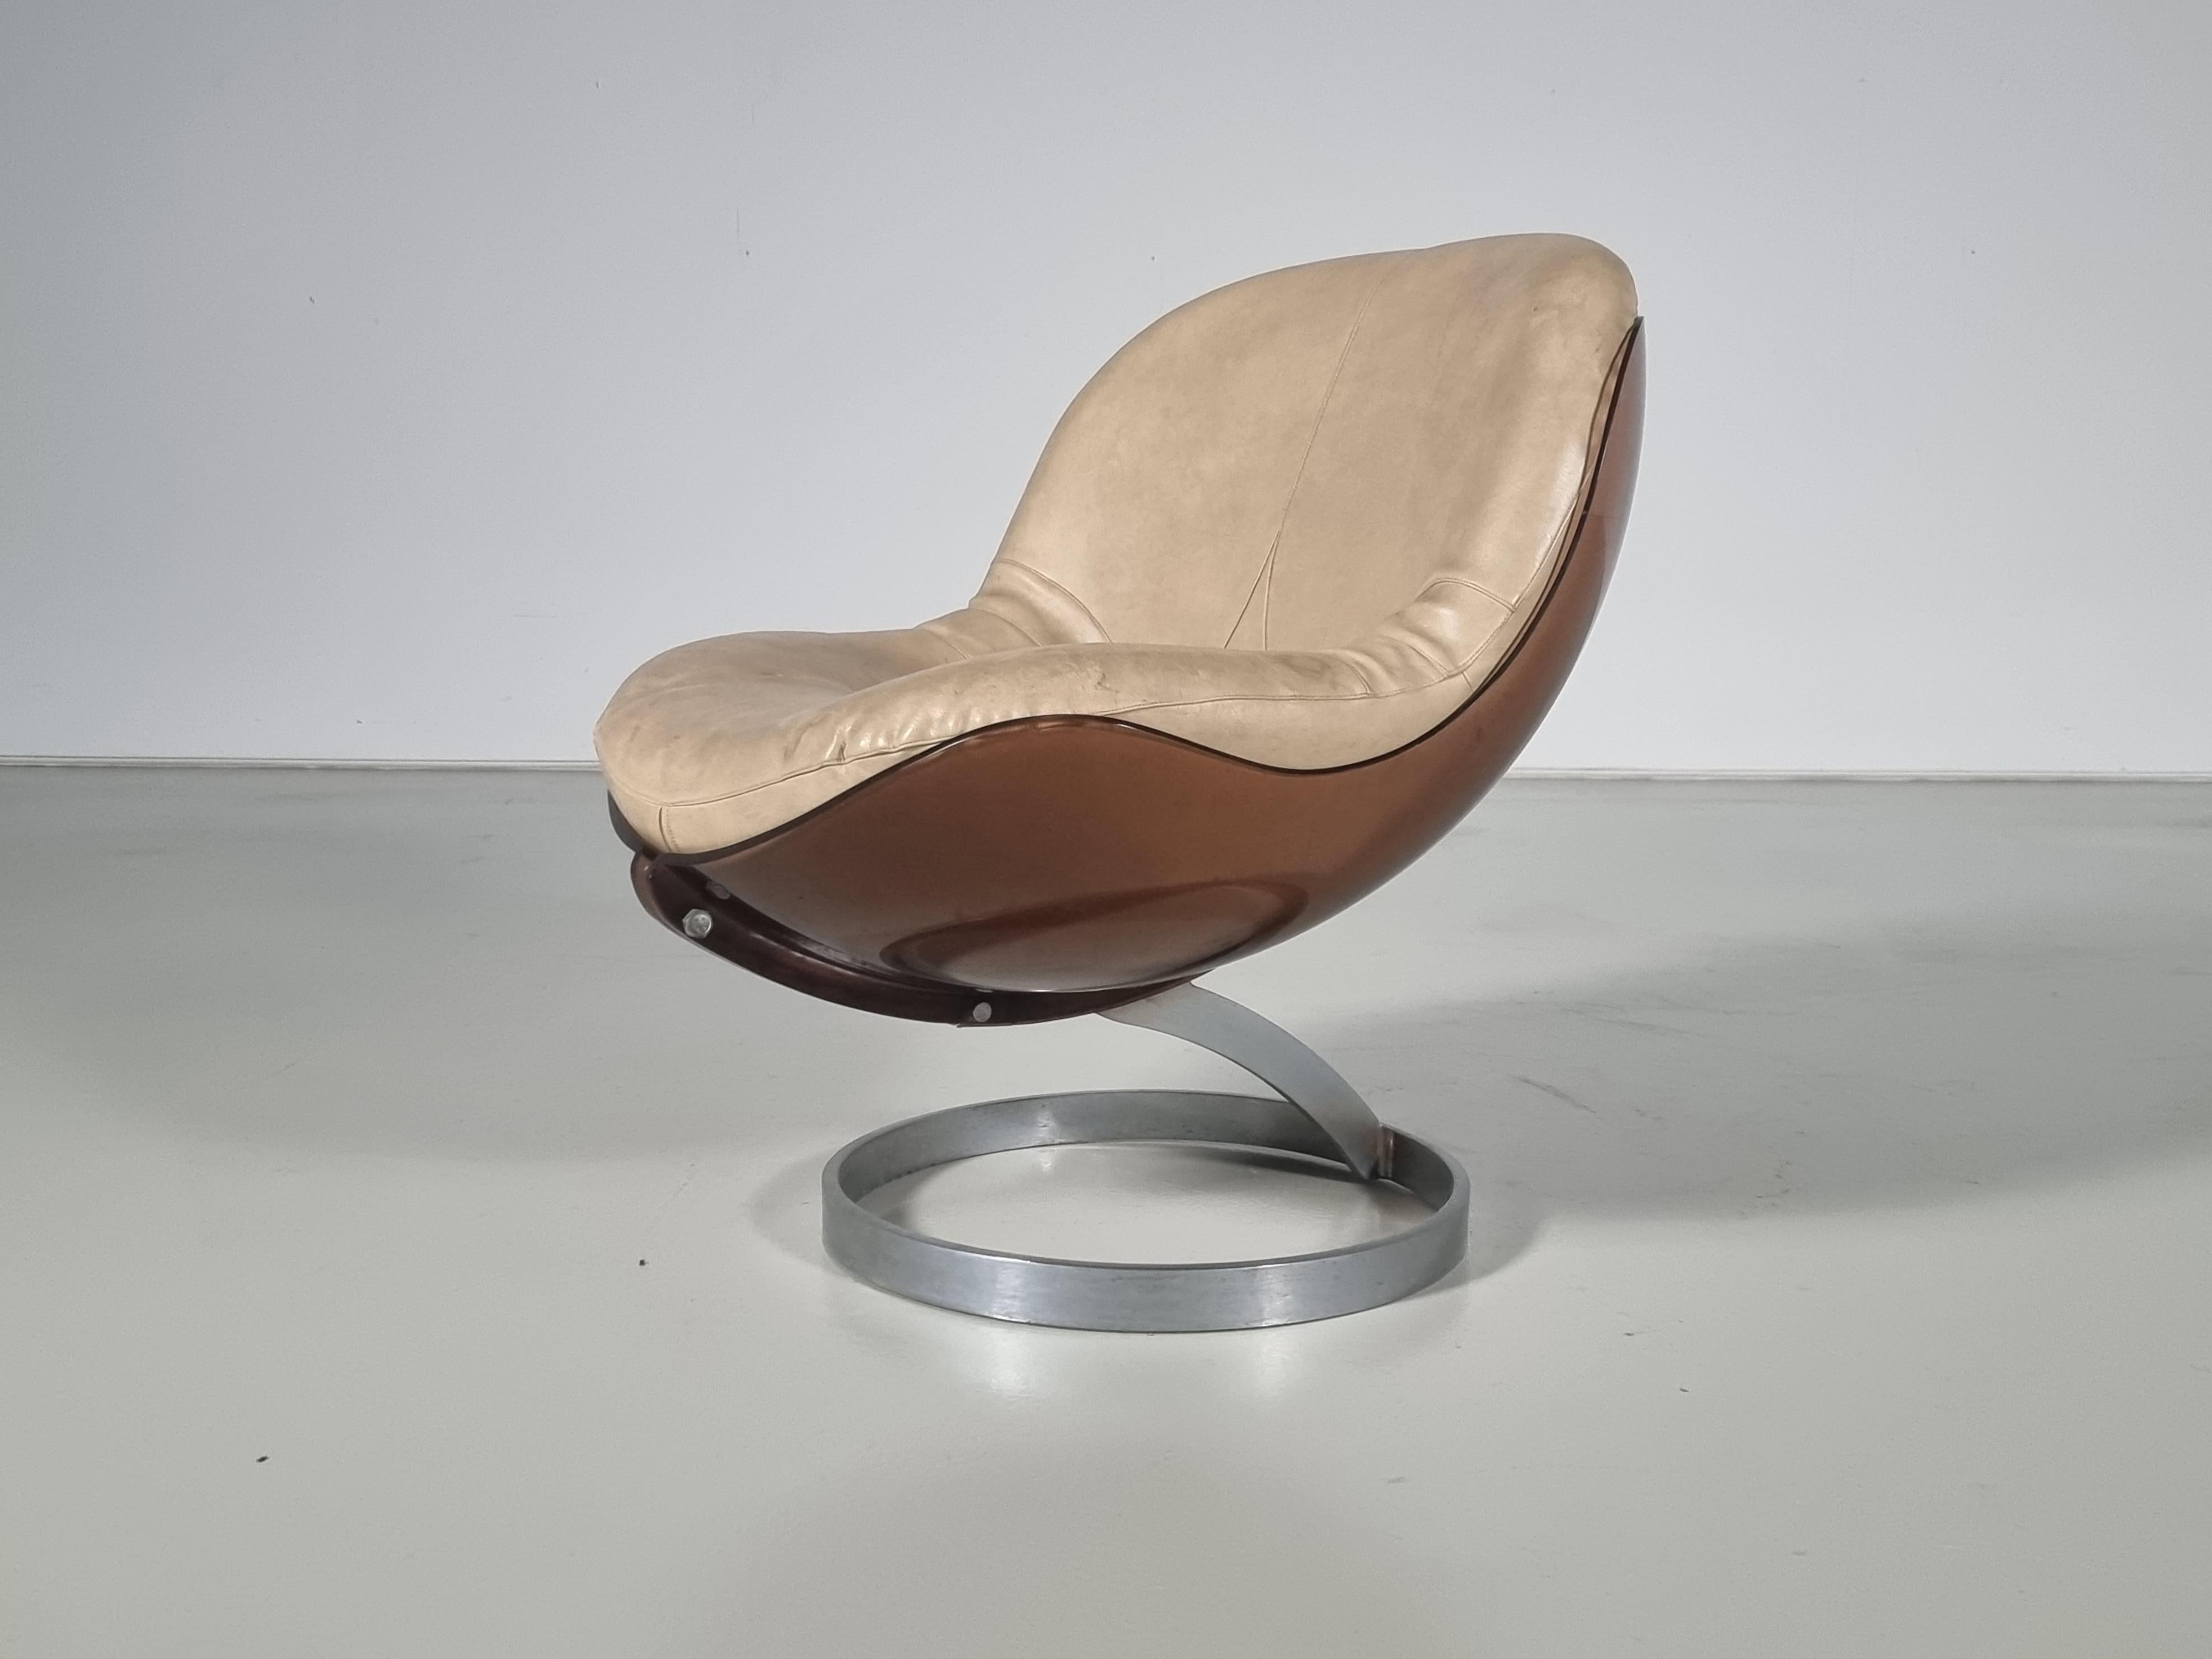 Rare ’Sphere’ lounge chair designed by Boris Tabacoff in 1971. Manufactured by the French MMM. factory (Mobilier Modular Moderne) It has a characteristic brown lucite shell that holds the original thick leather cushion. The plexiglass shell is held